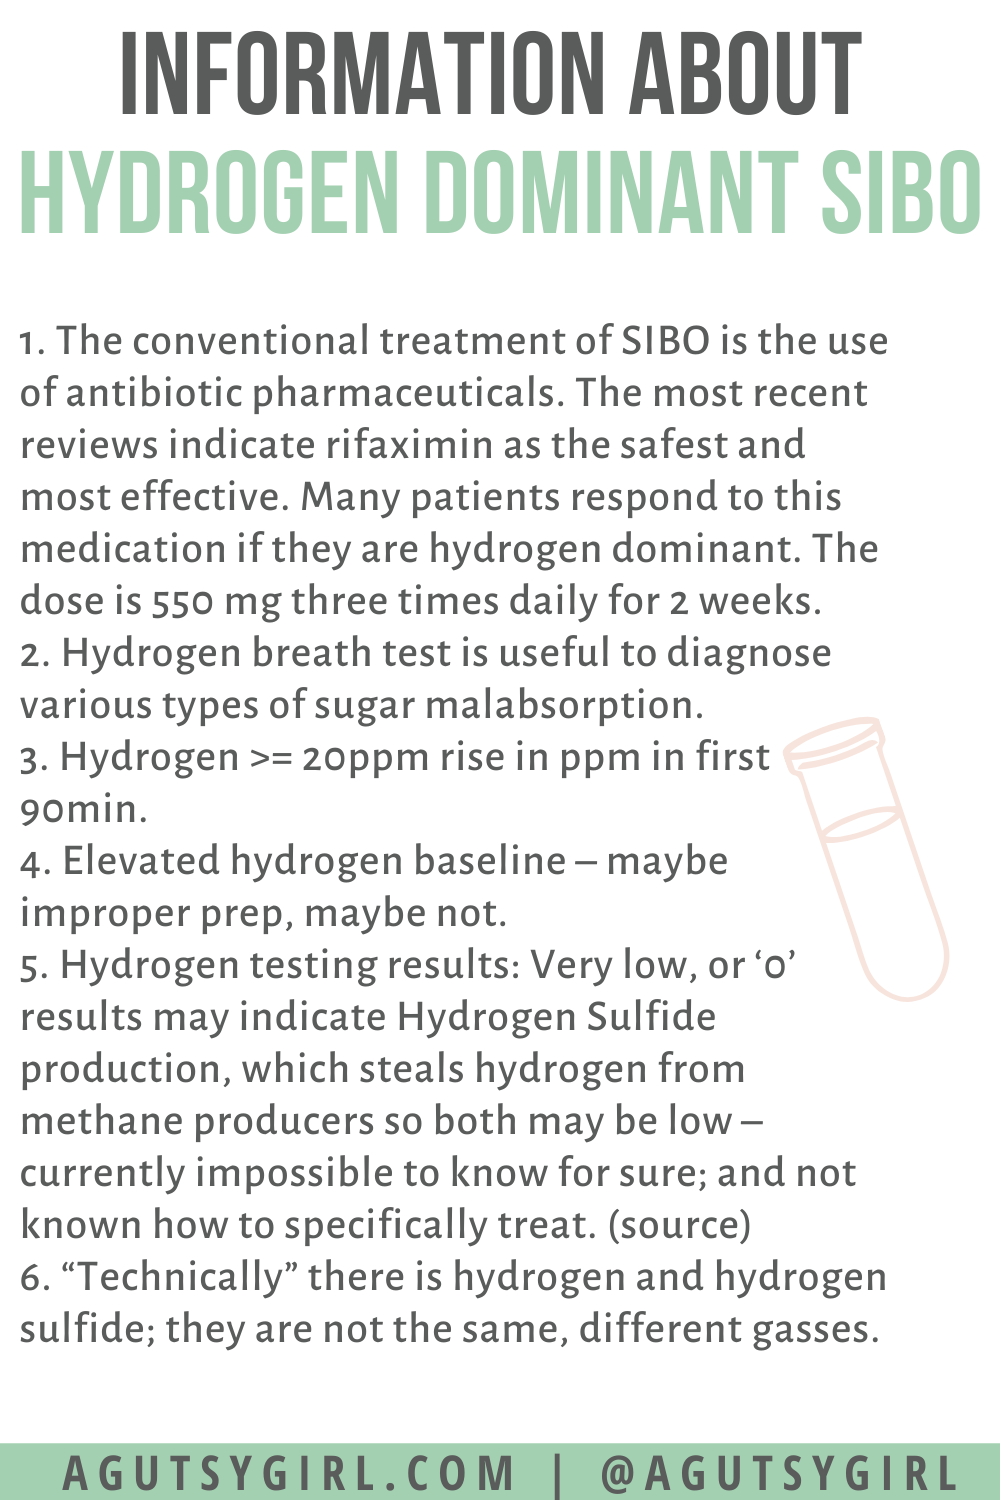 Information About Hydrogen Dominant SIBO What is Hydrogen Dominant SIBO agutsygirl.com #SIBO #fodmap #hydrogen